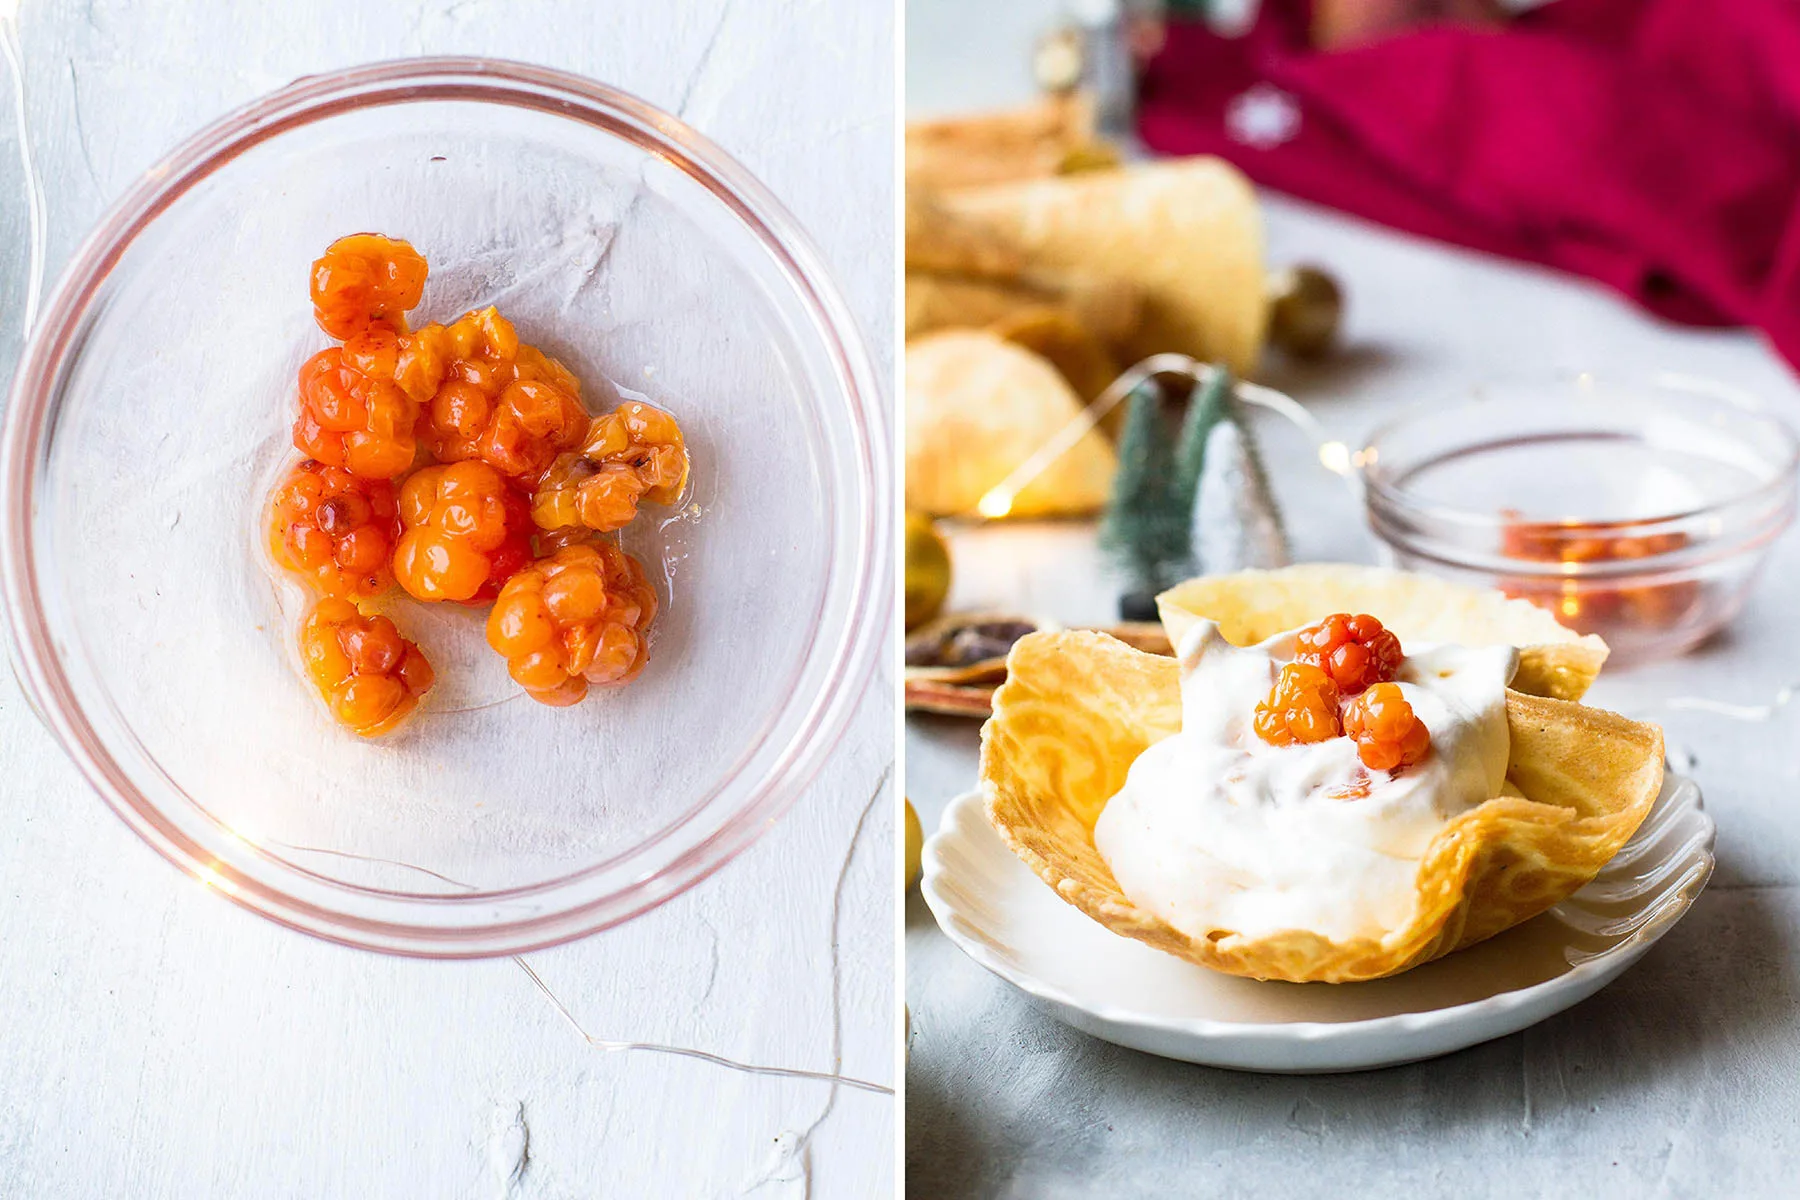 Steps to make whipped cloudberry cream.